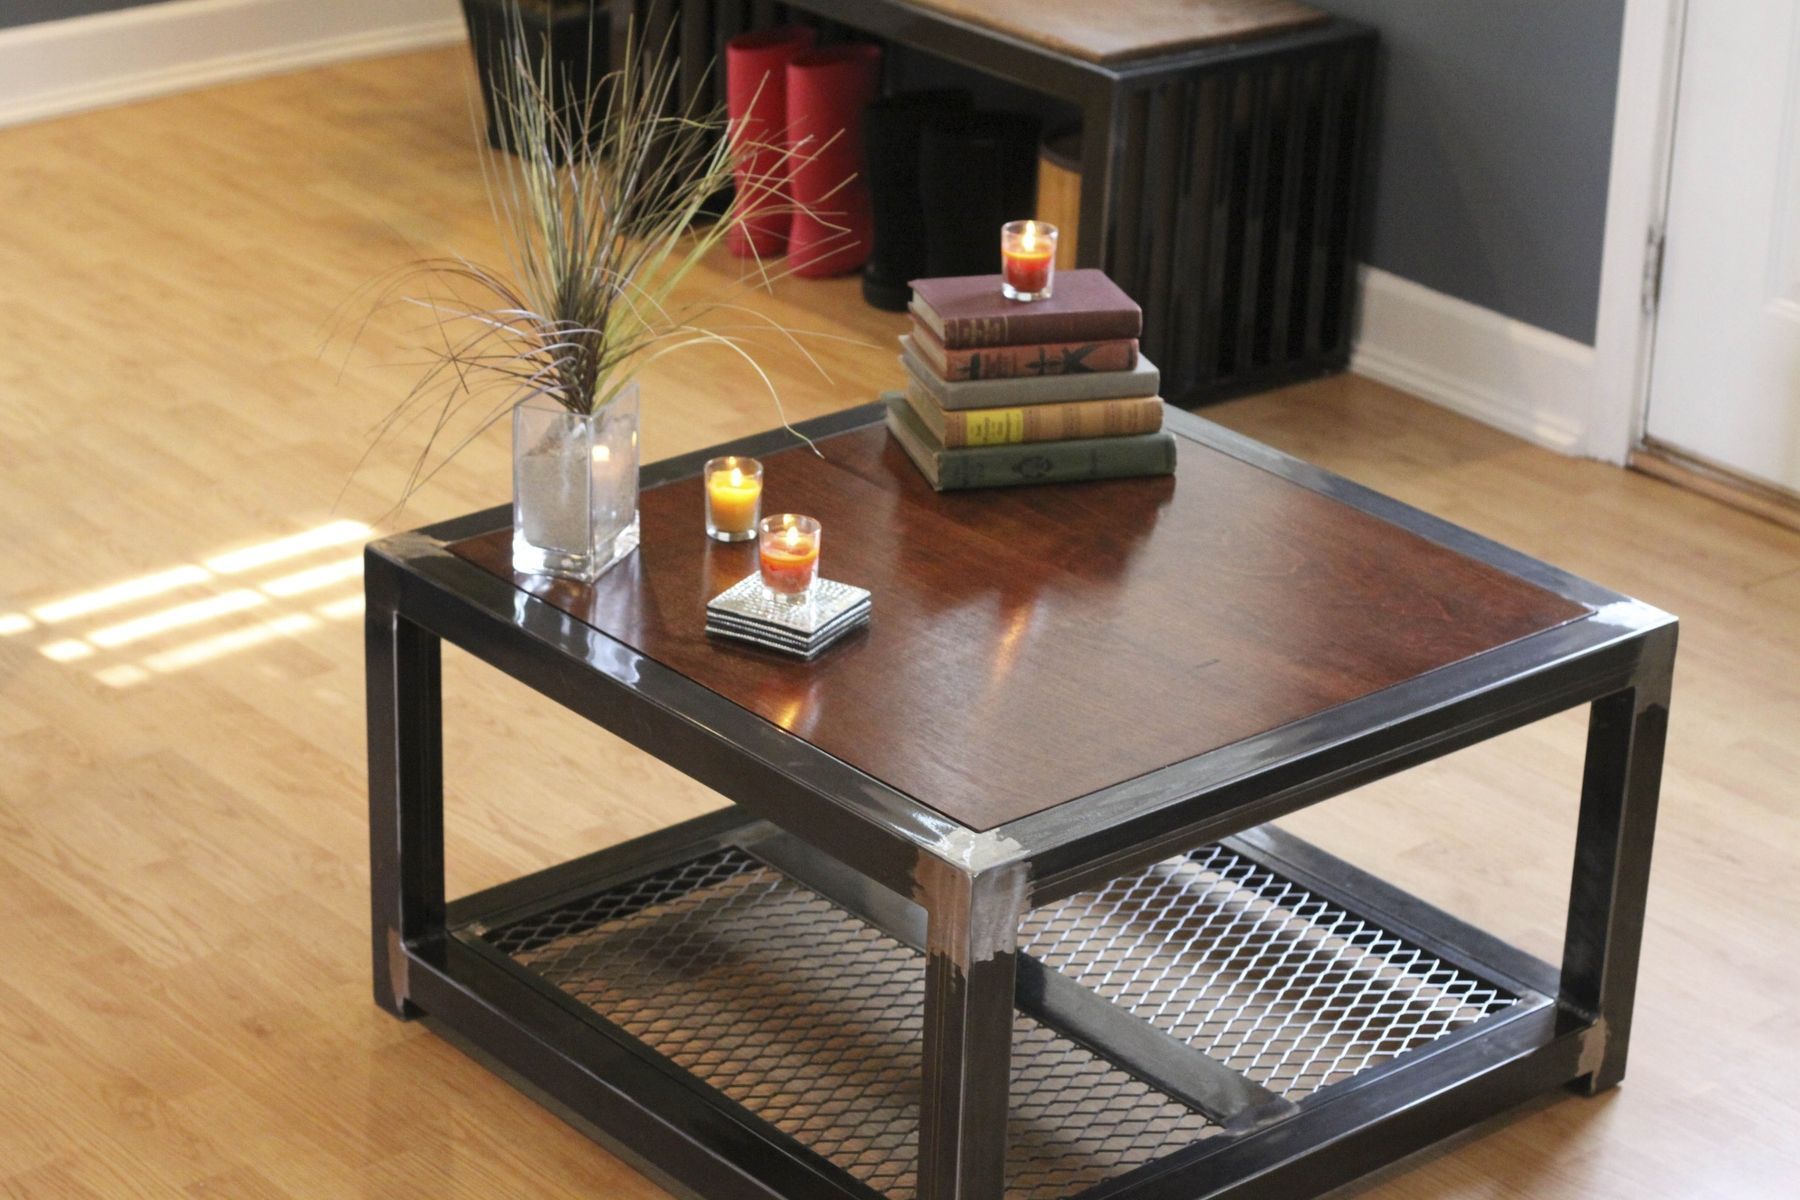 Custom Made Steel And Wood Coffee Table | Welded Furniture, Metal With Regency Cain Steel Coffee Tables (View 10 of 15)